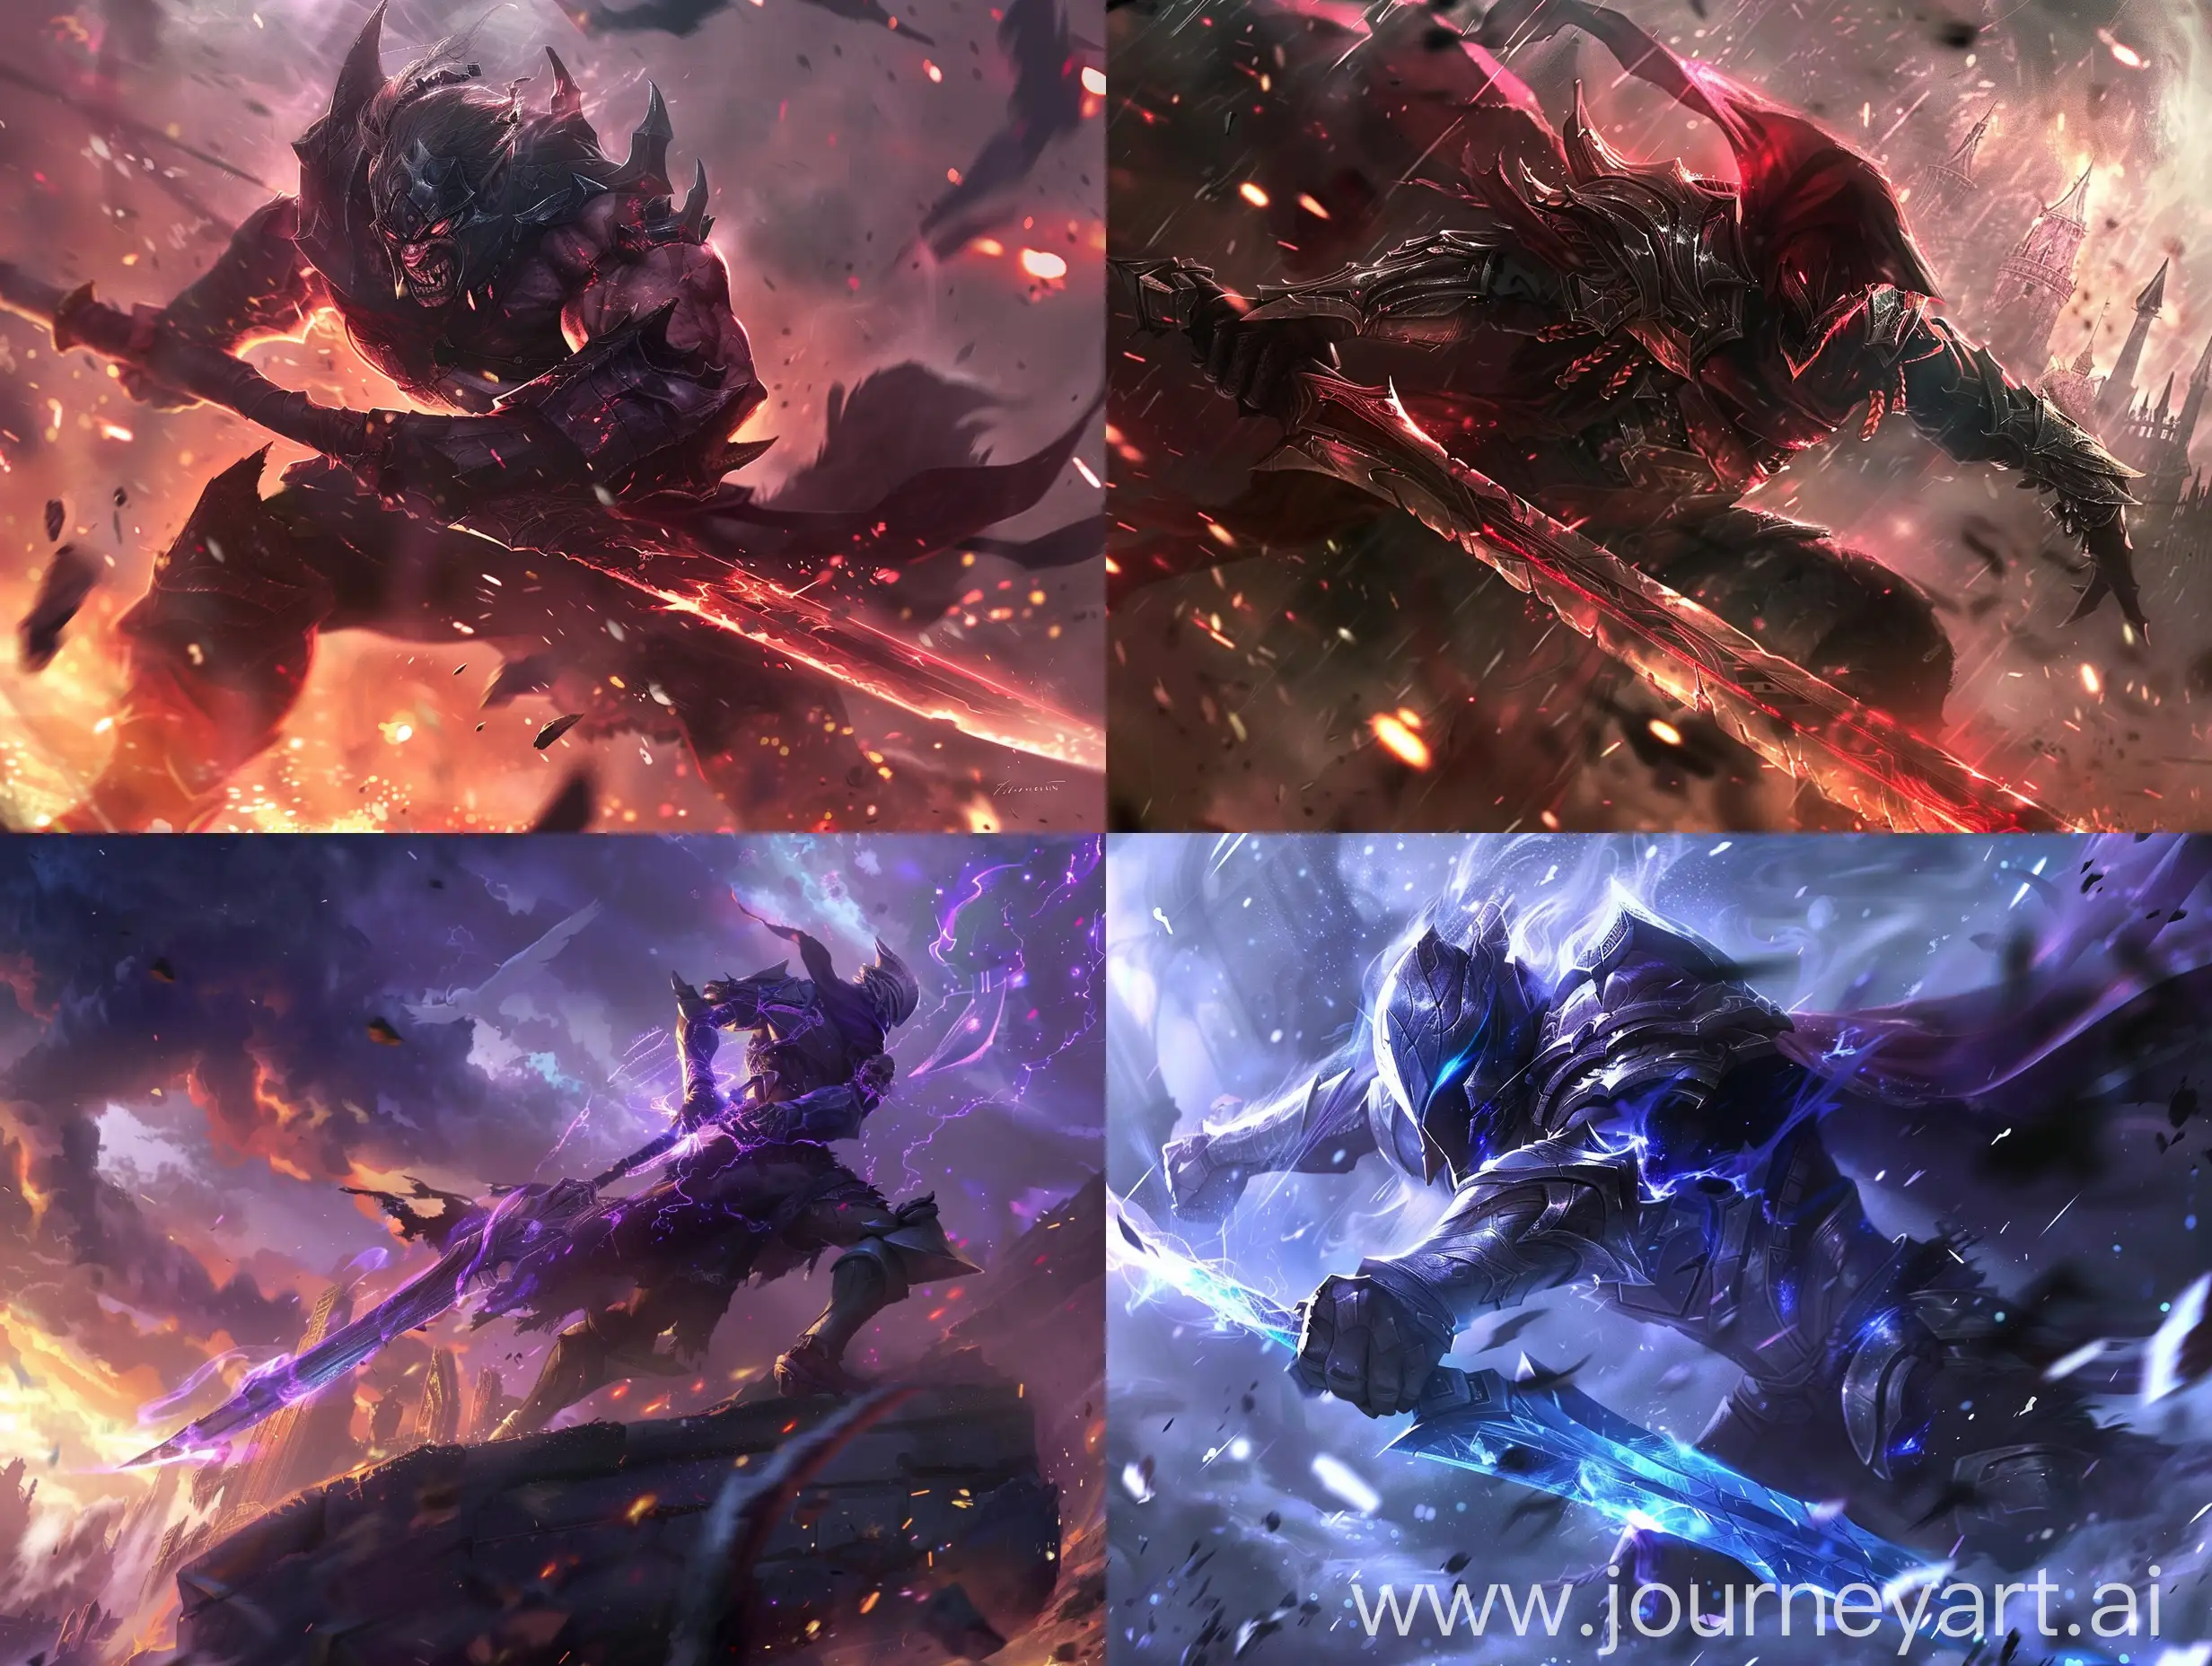 League of legends splash art, cinematic lighting, warrior in action pose, low angle shot, league of legends style